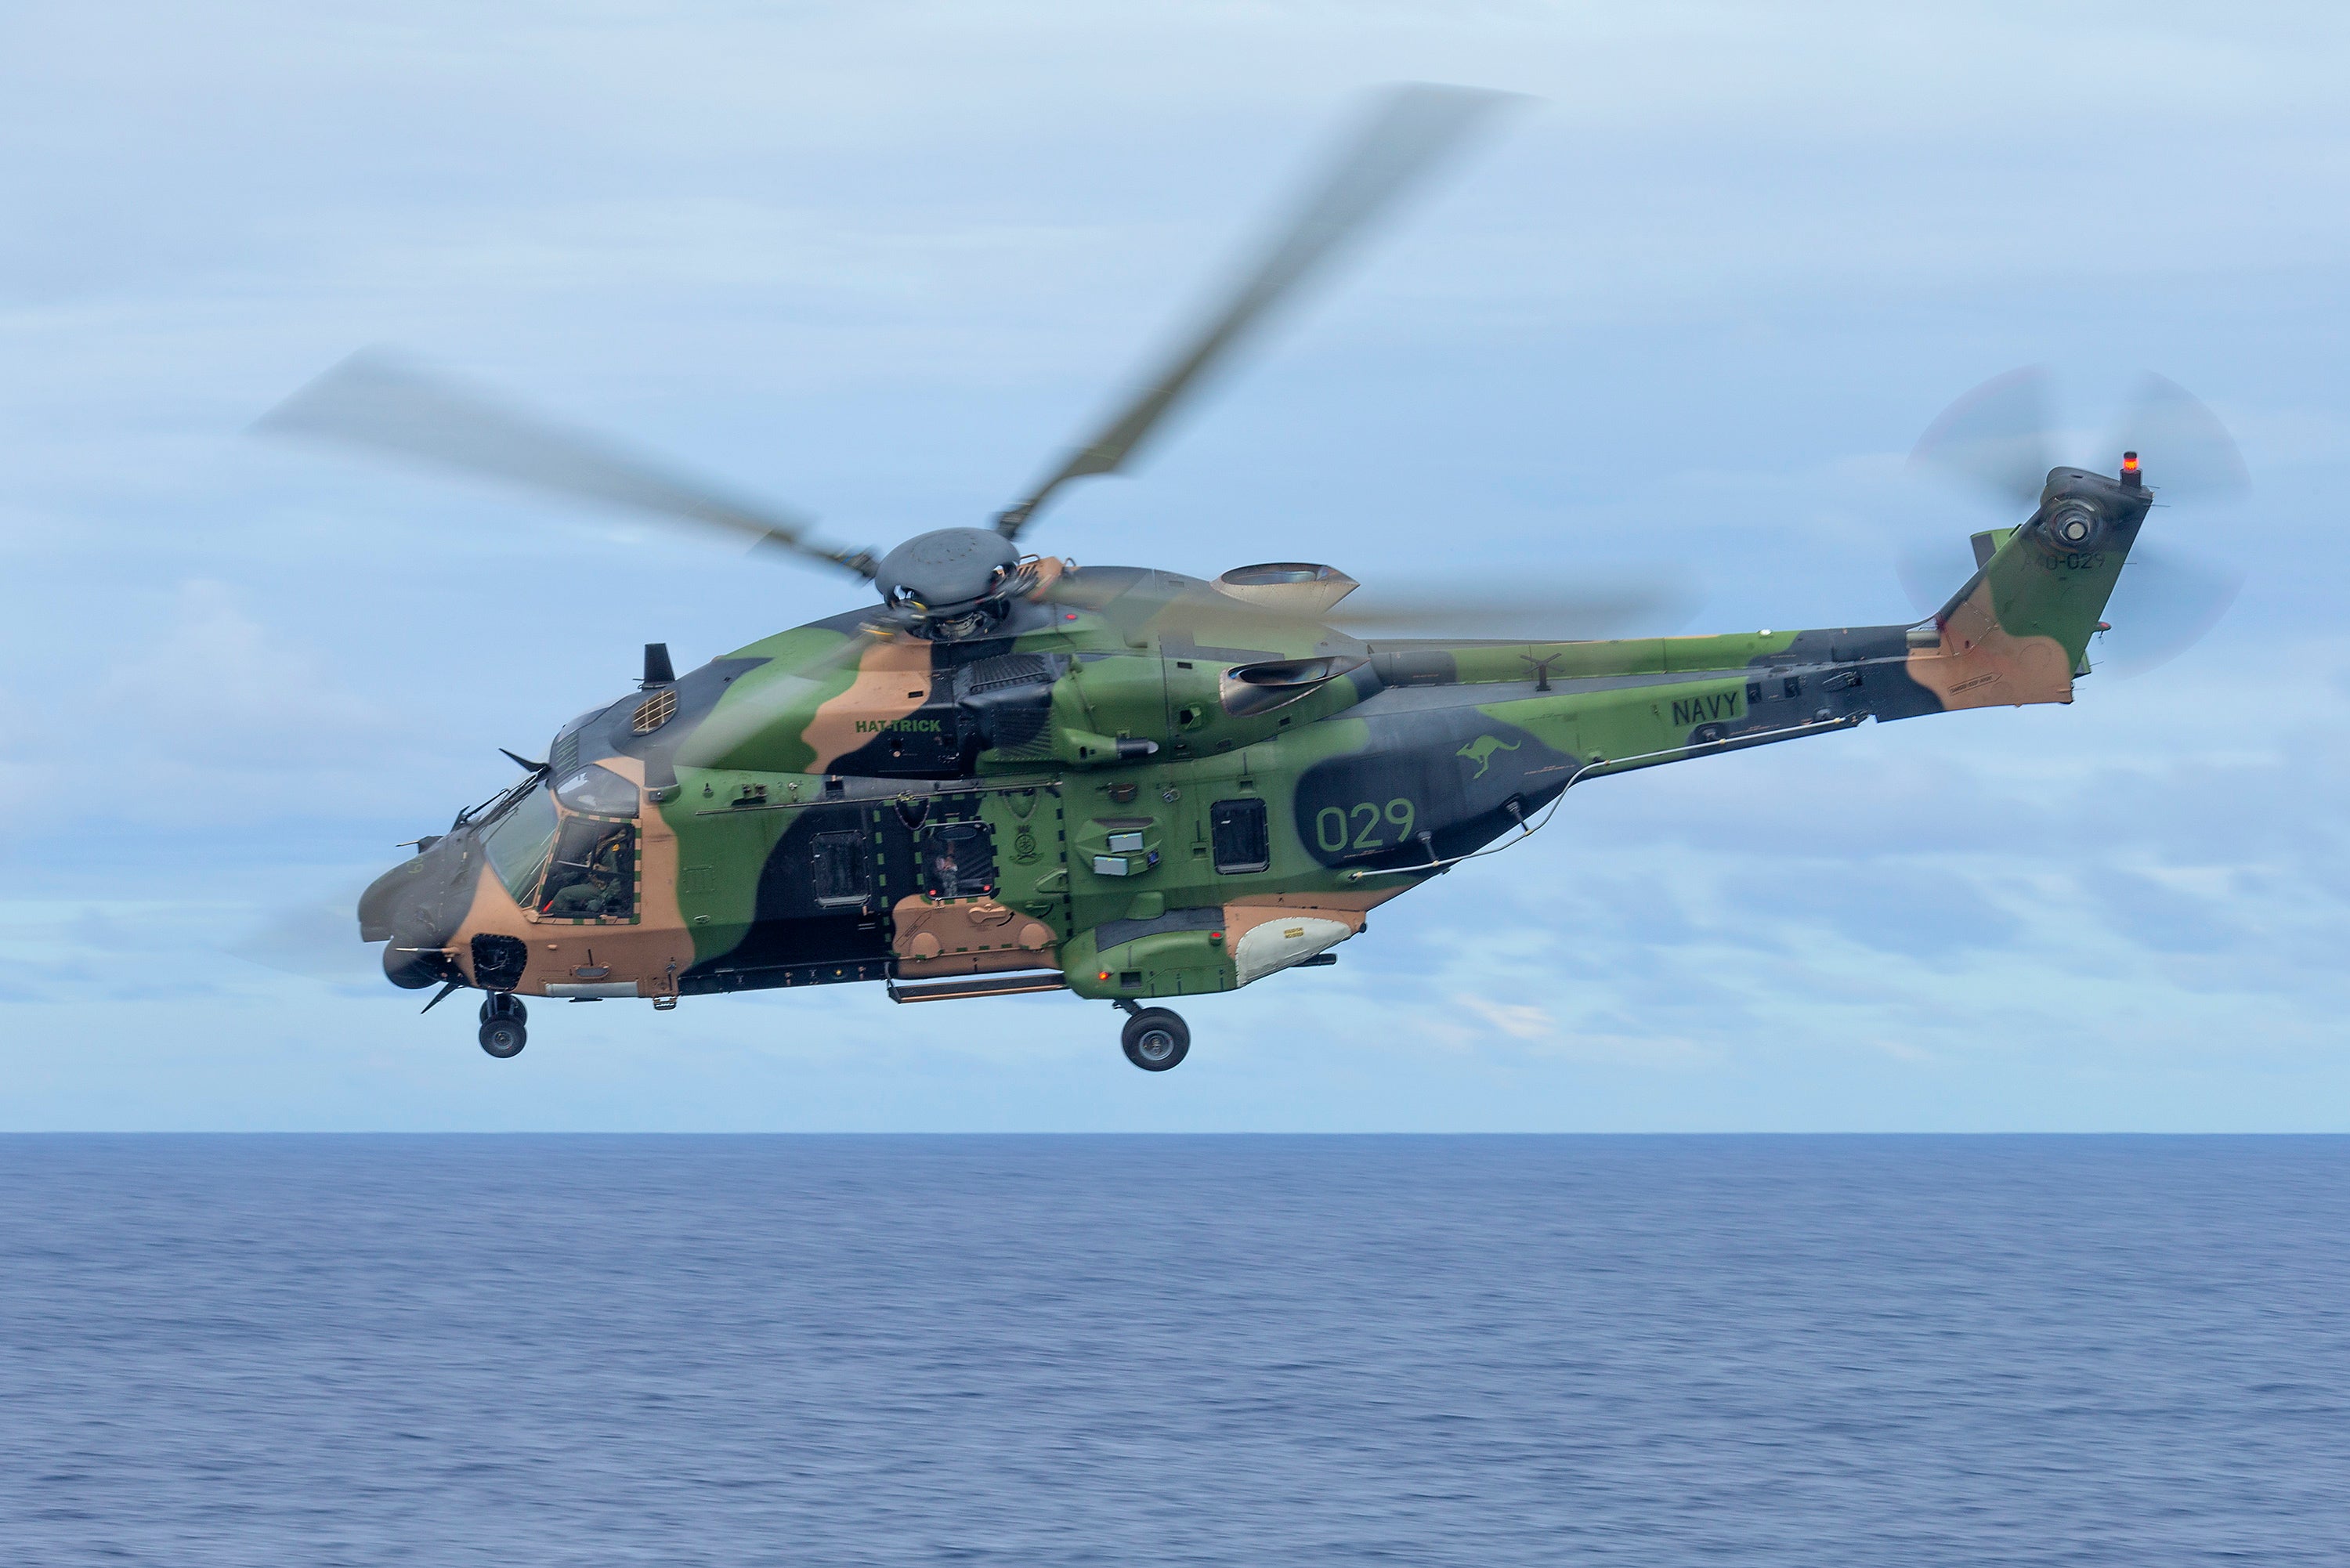 An Australian Army MRH-90 Taipan helicopter conducting flying serials